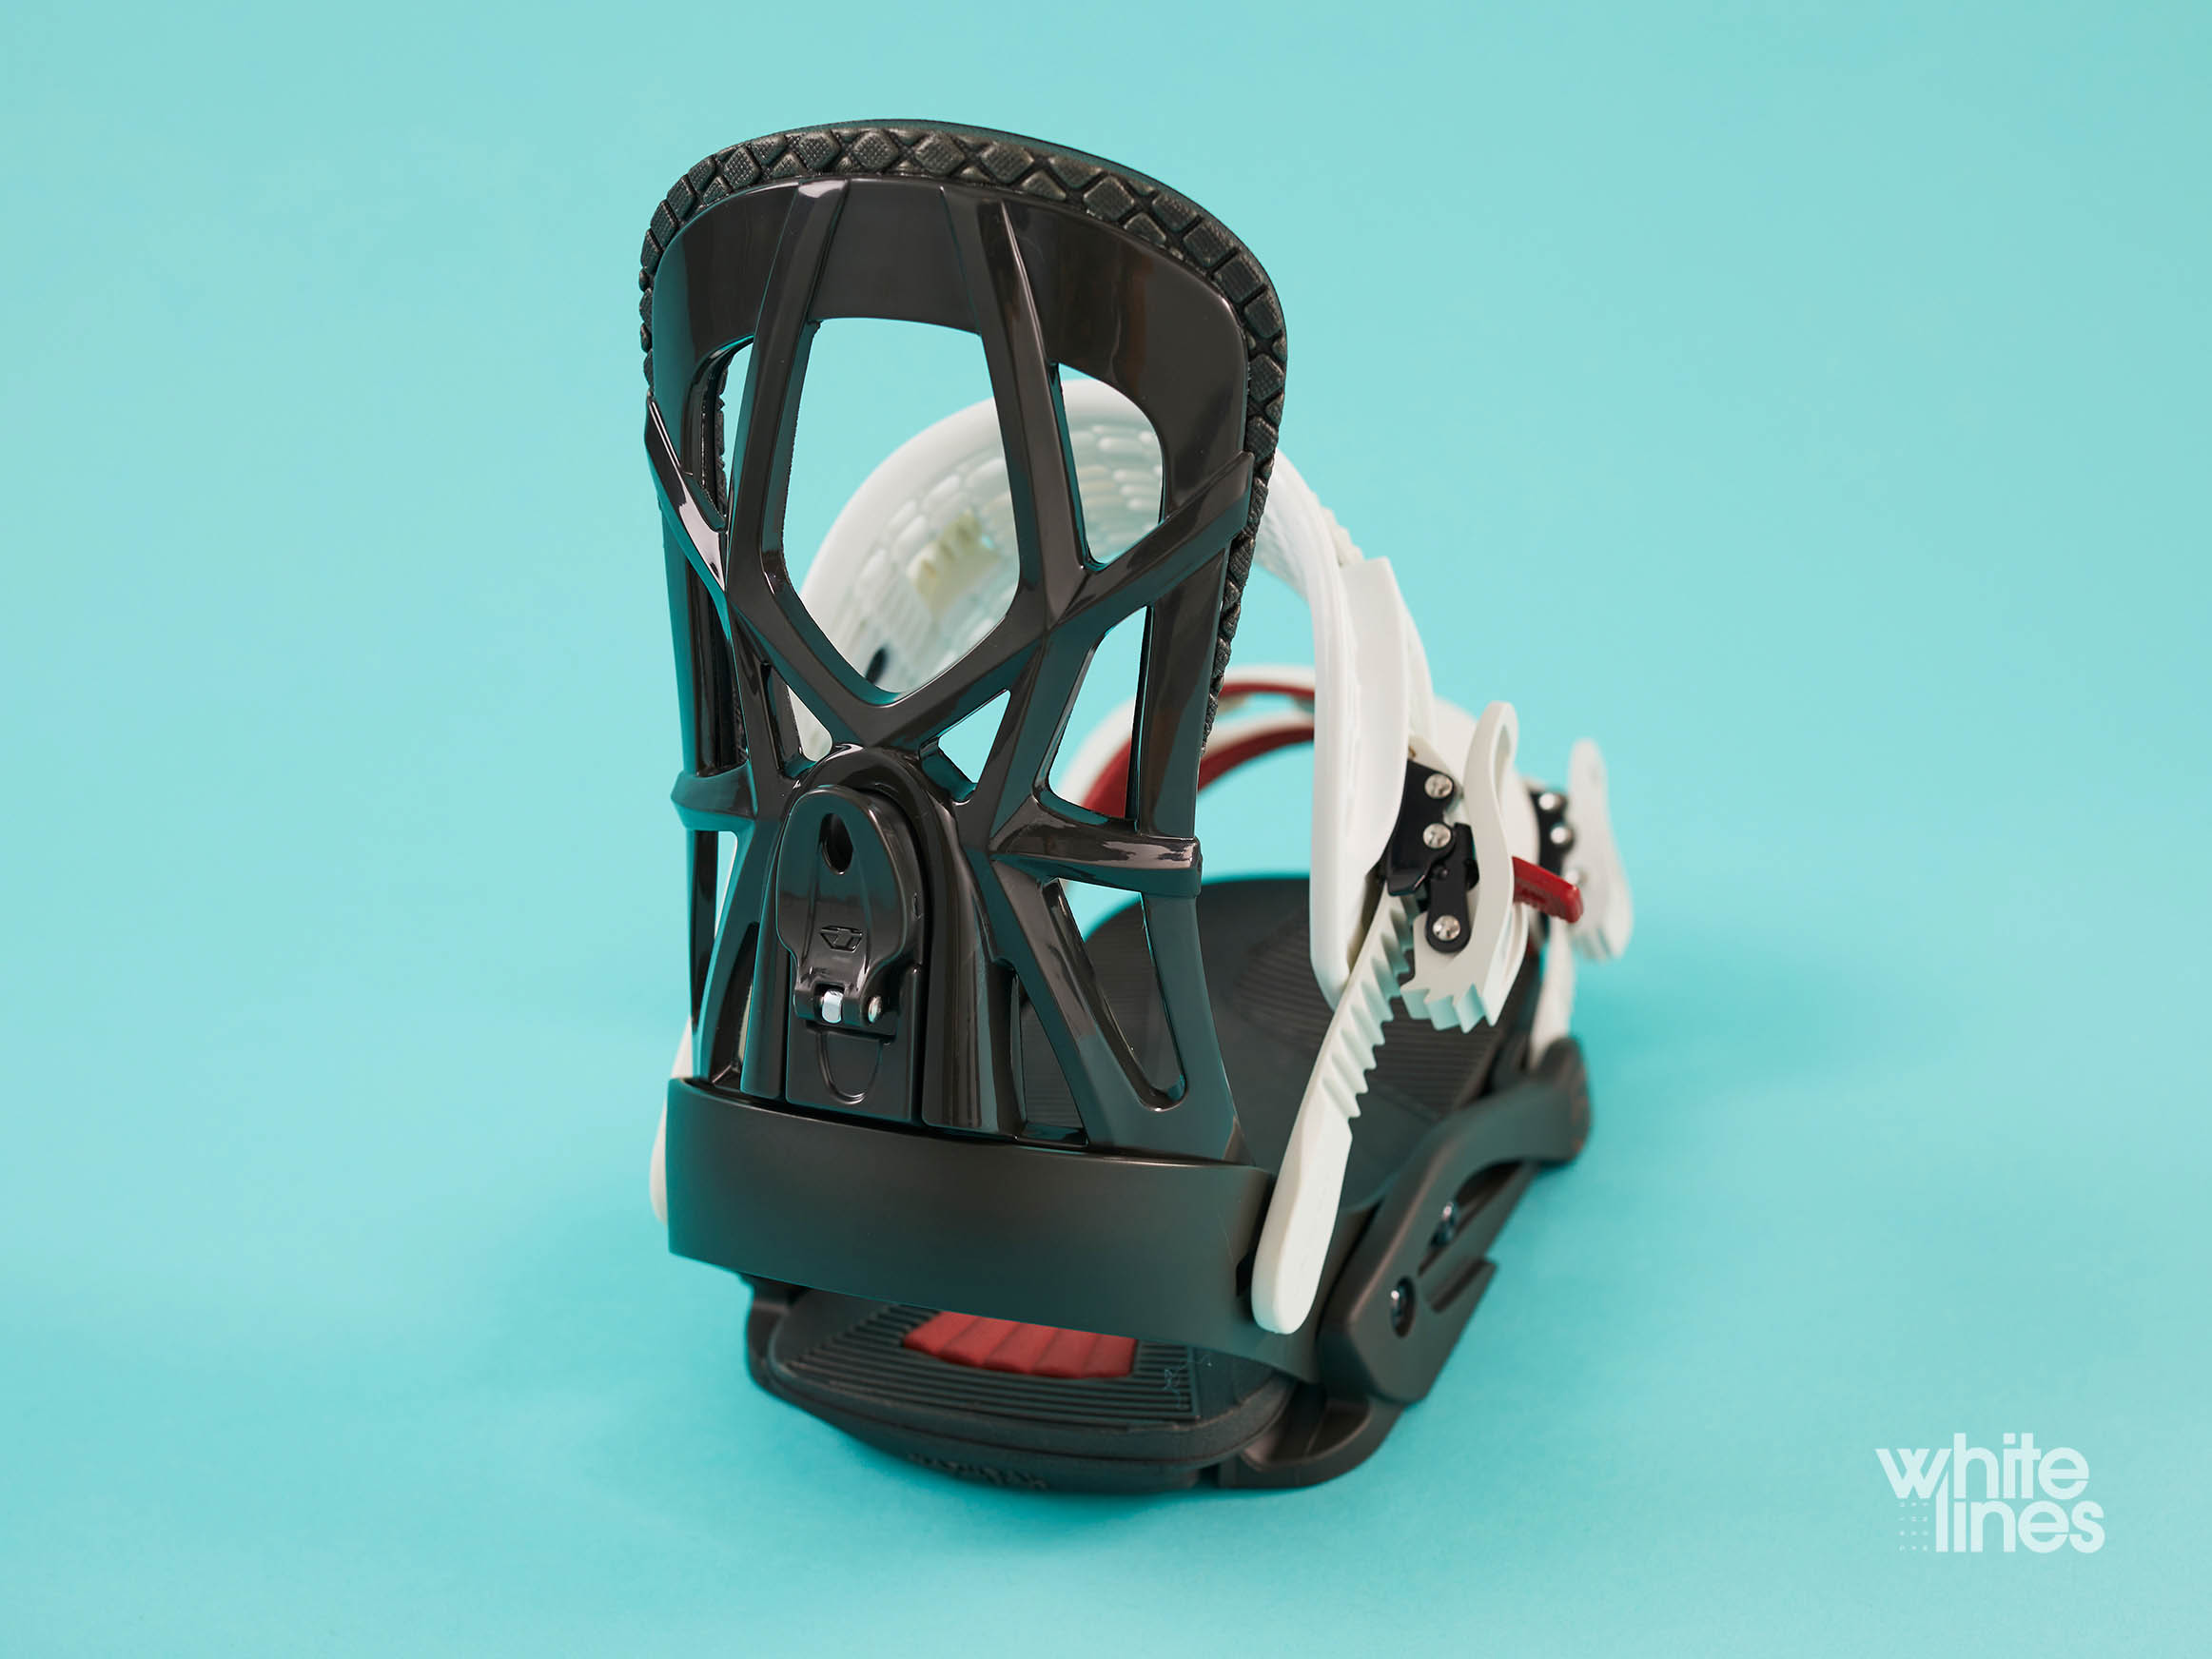 Drake Fifty 2021-2022 Snowboard Bindings Review - Wh